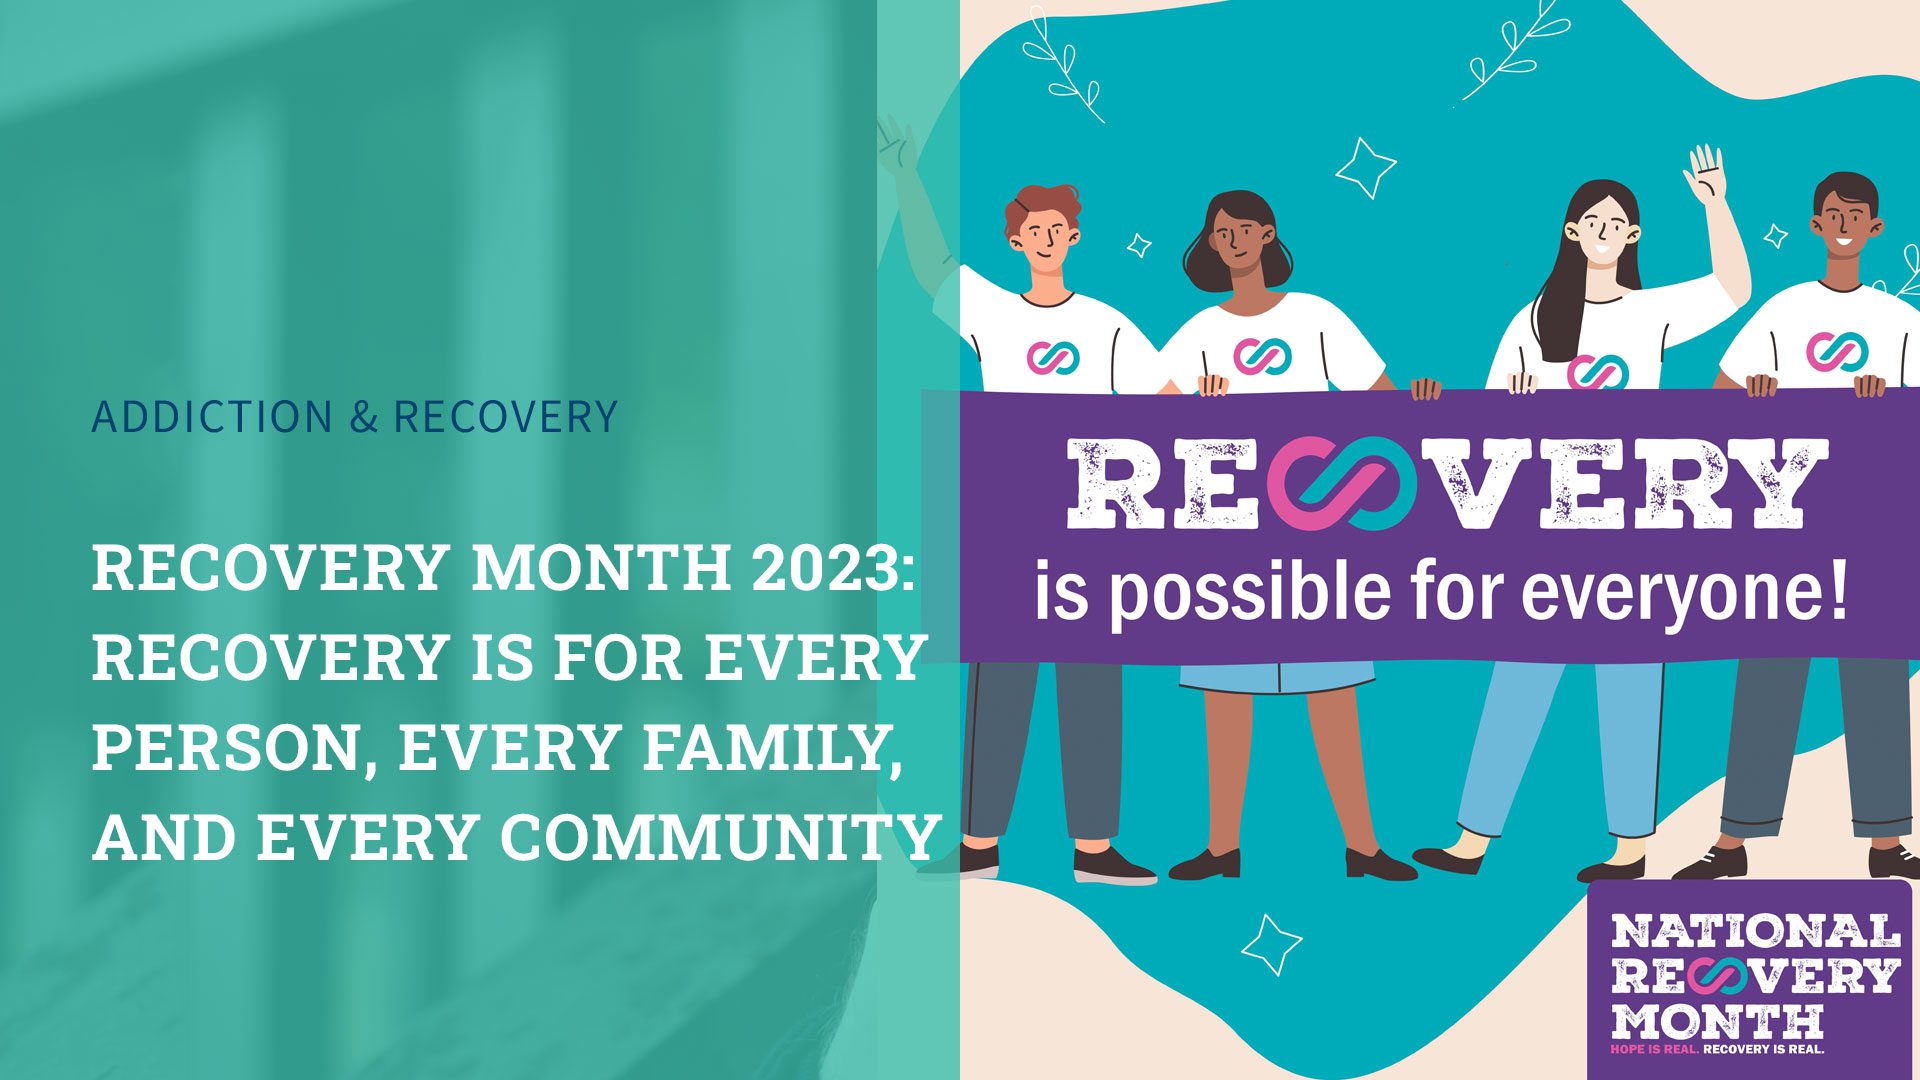 Recovery Month 2023: Recovery is for Every Person, Every Family, and Every Community